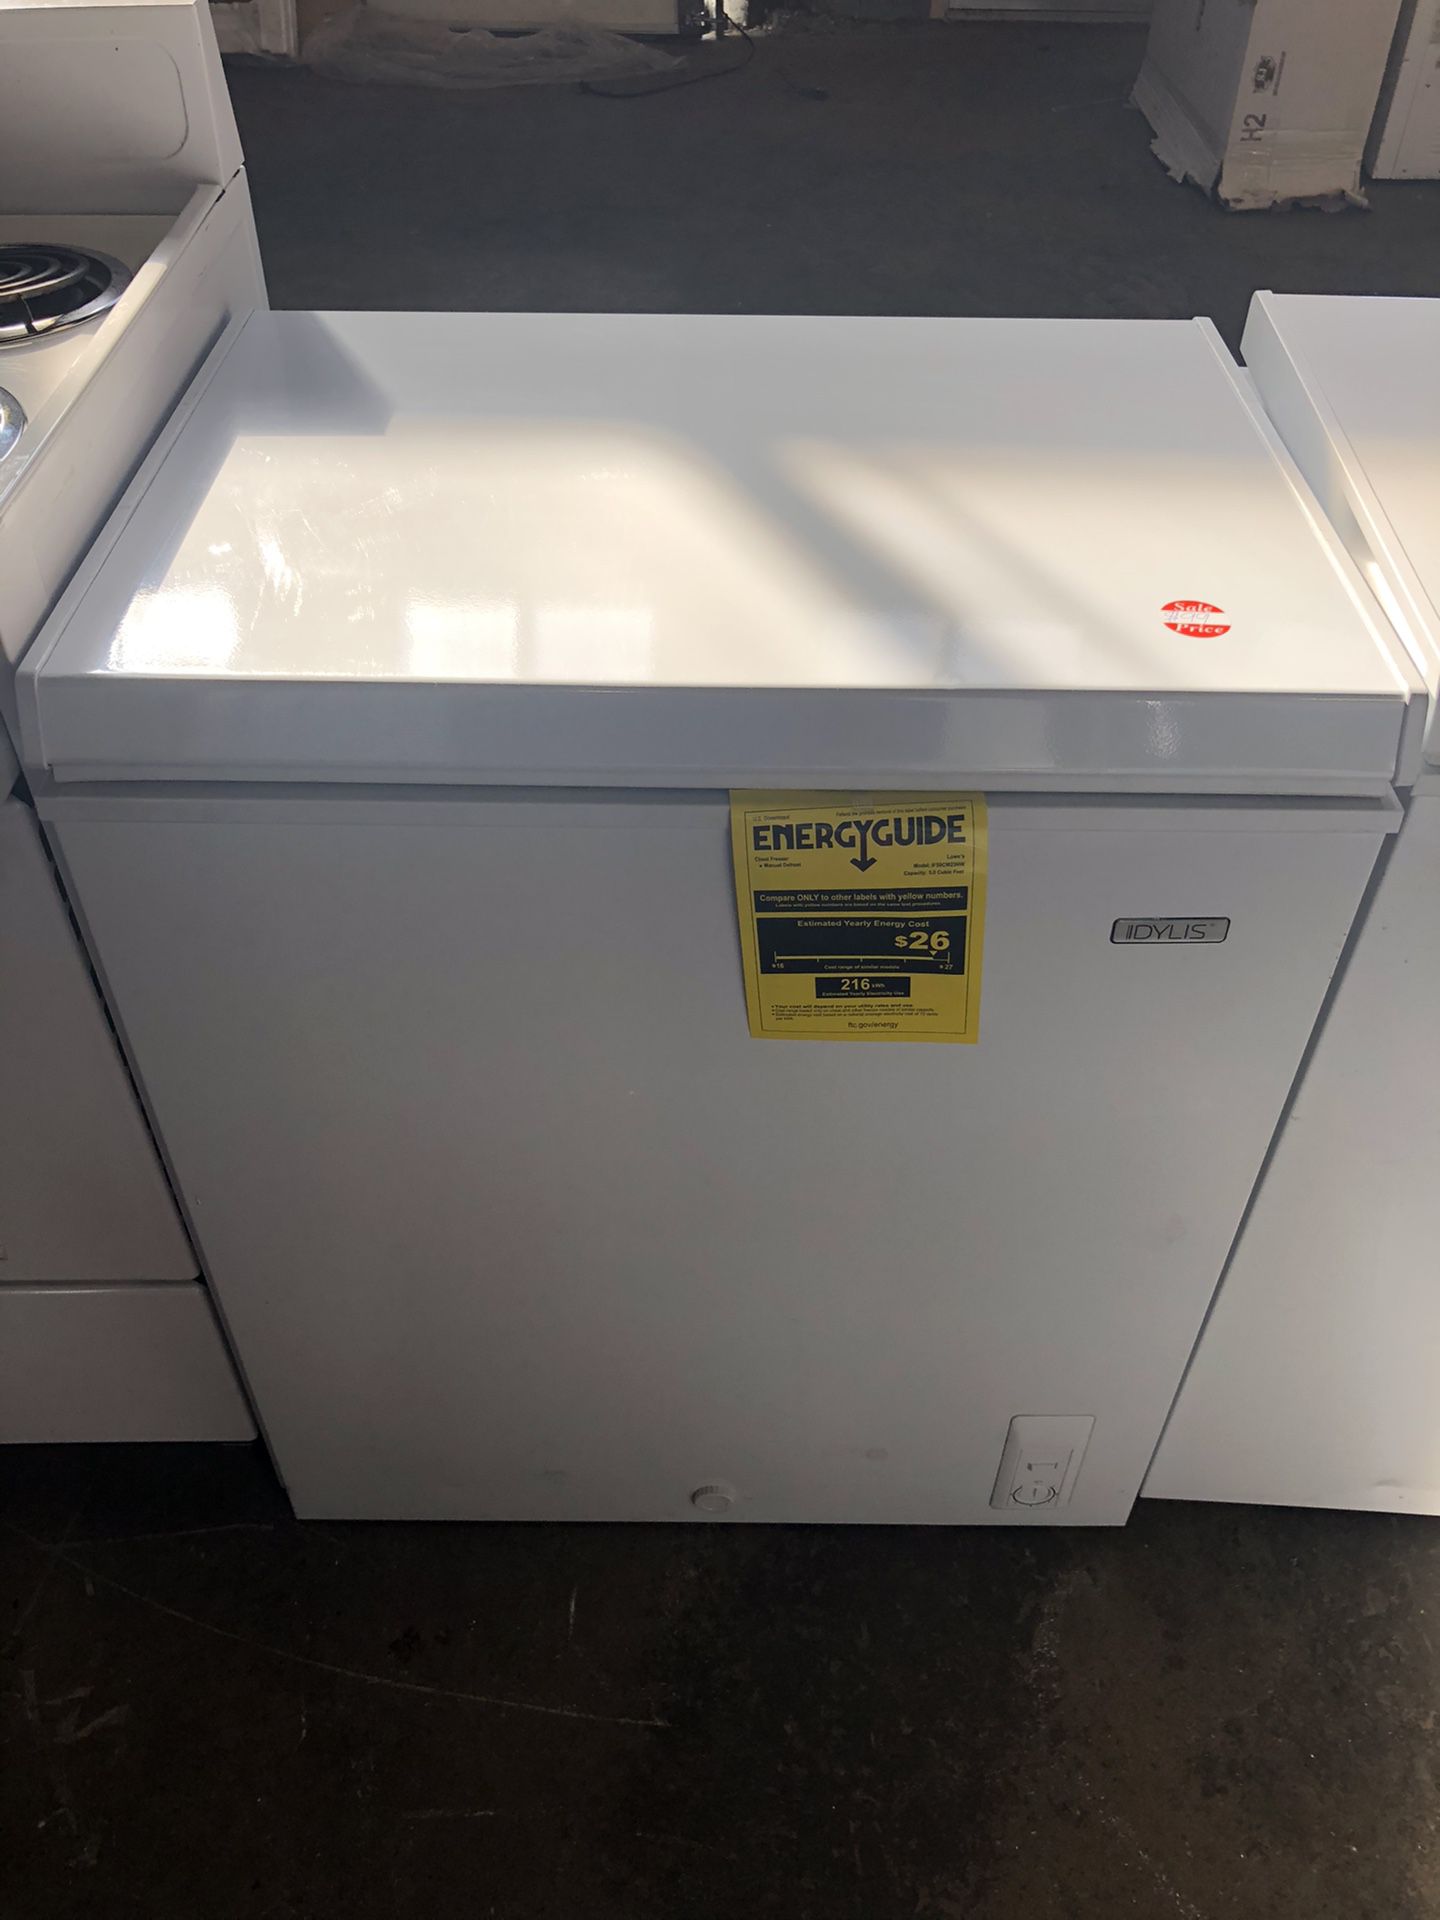 New Chest freezer starting price from $149 and up with warranty